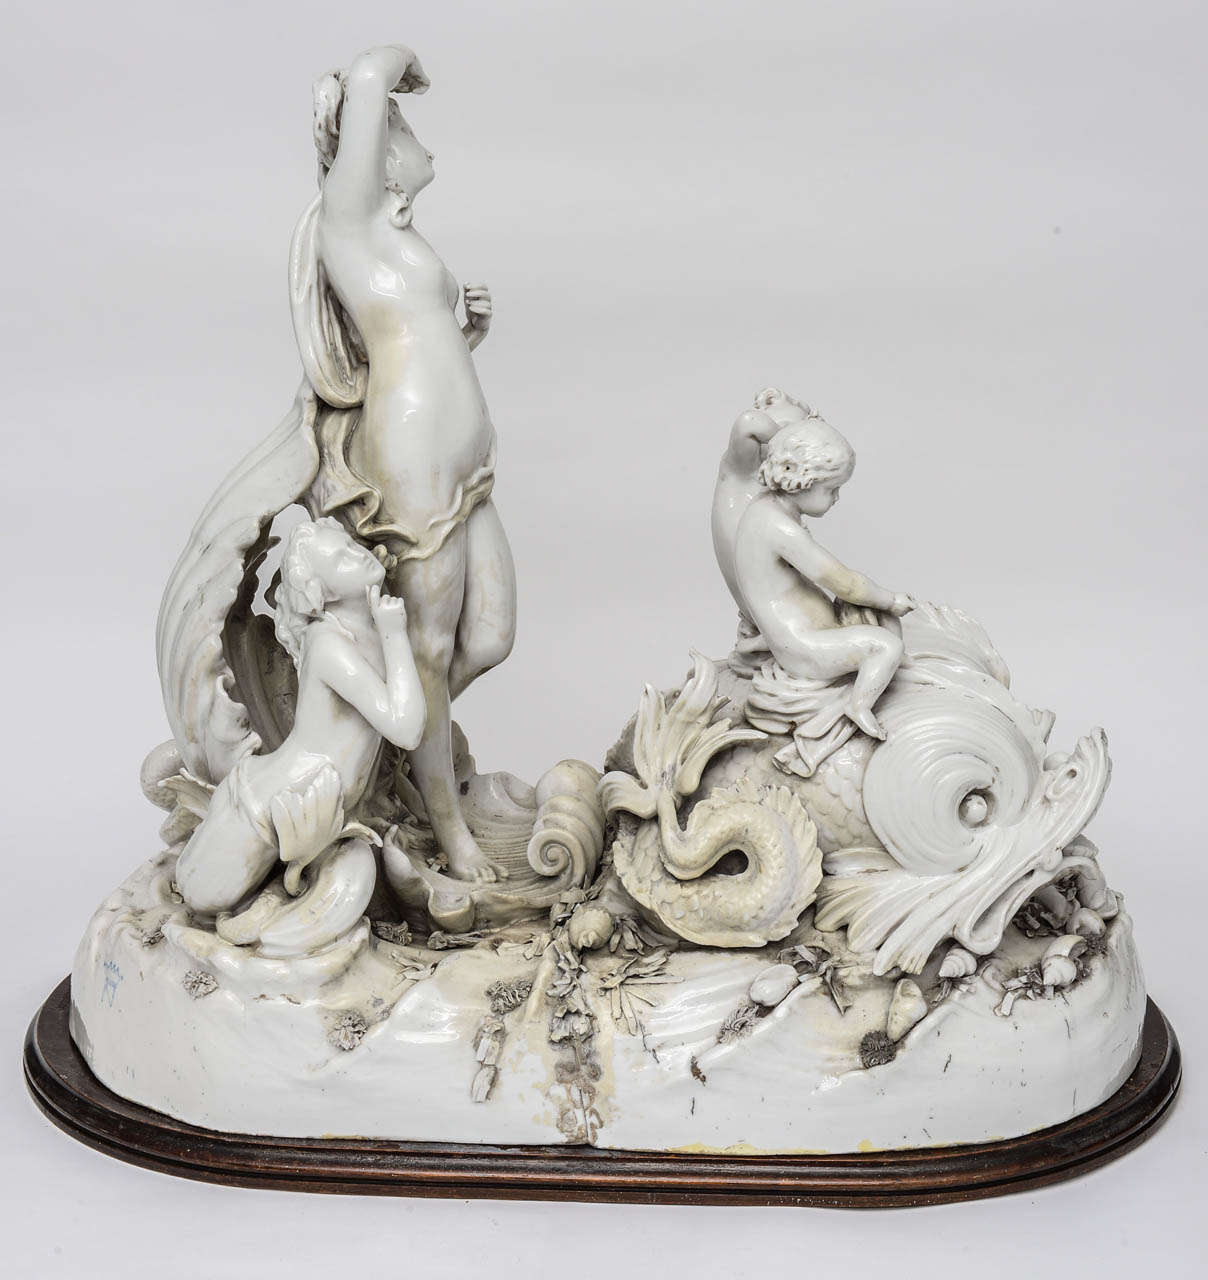 This large Capodimonte centerpiece featuring Amphitrite, goddess of the sea and wife of Poseidon, riding a seashell chariot drawn by two dolphins was part of a full table garniture but can stand alone as an impressive confection of porcelain